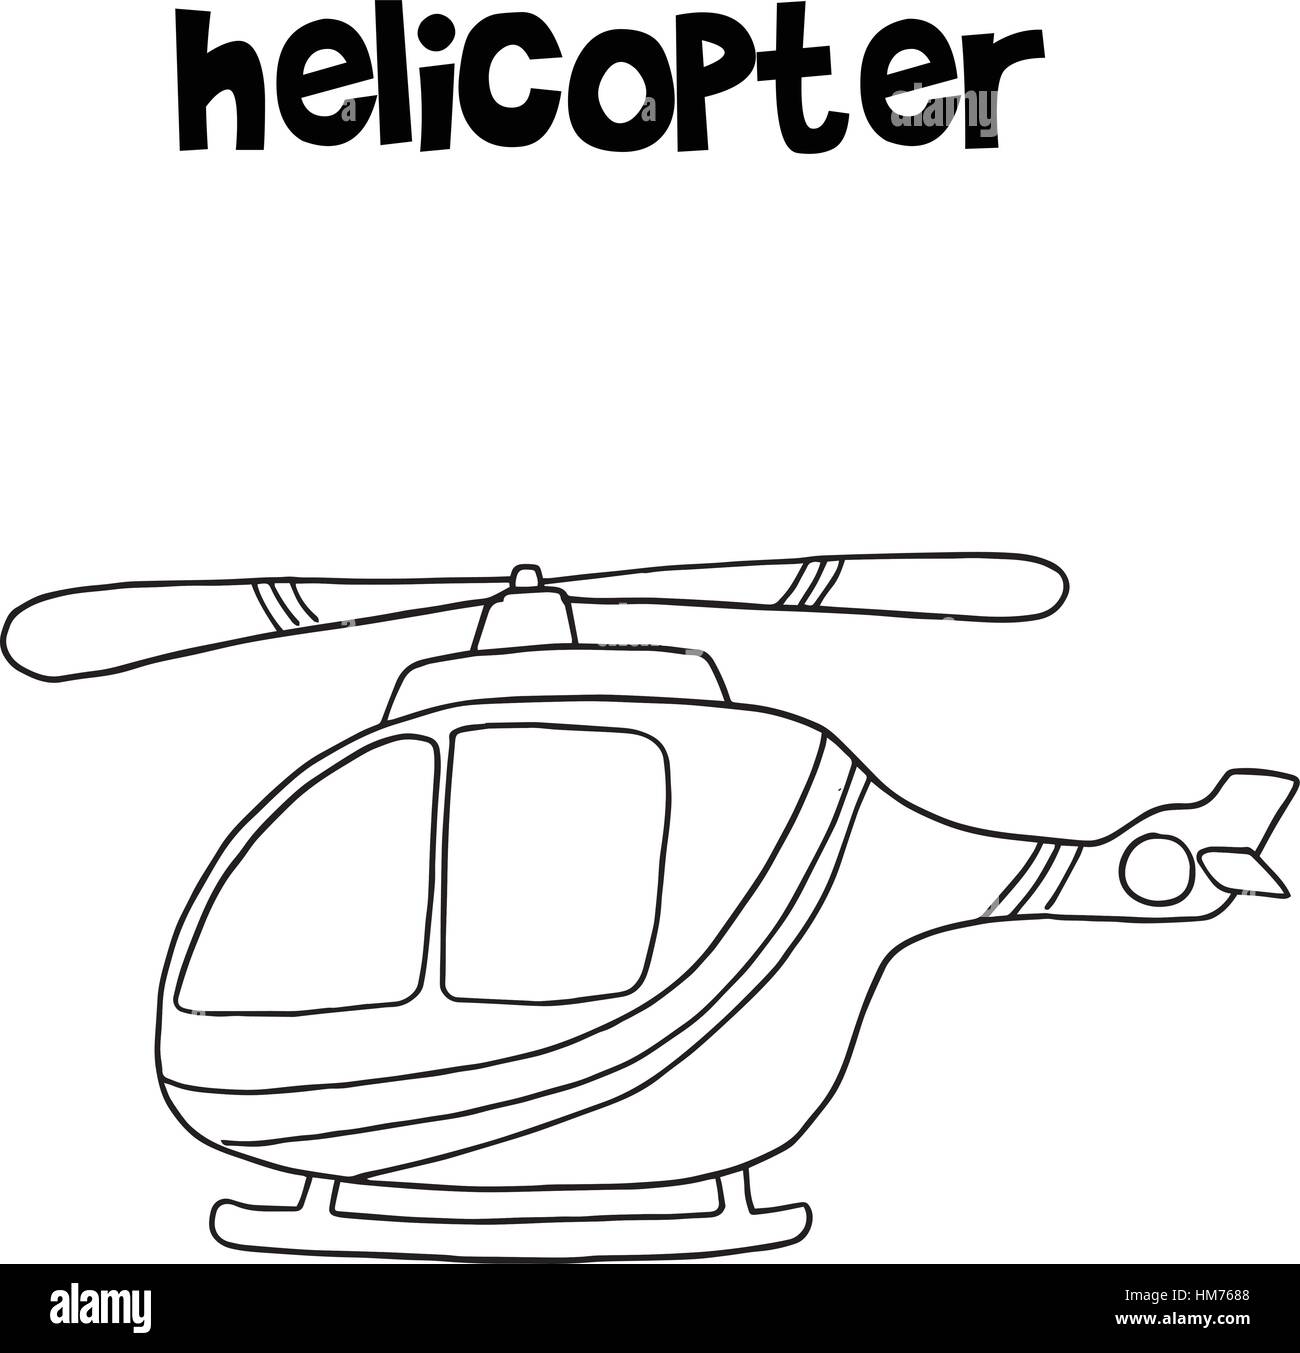 Helicopter vector art illustration collection hand draw Stock ...